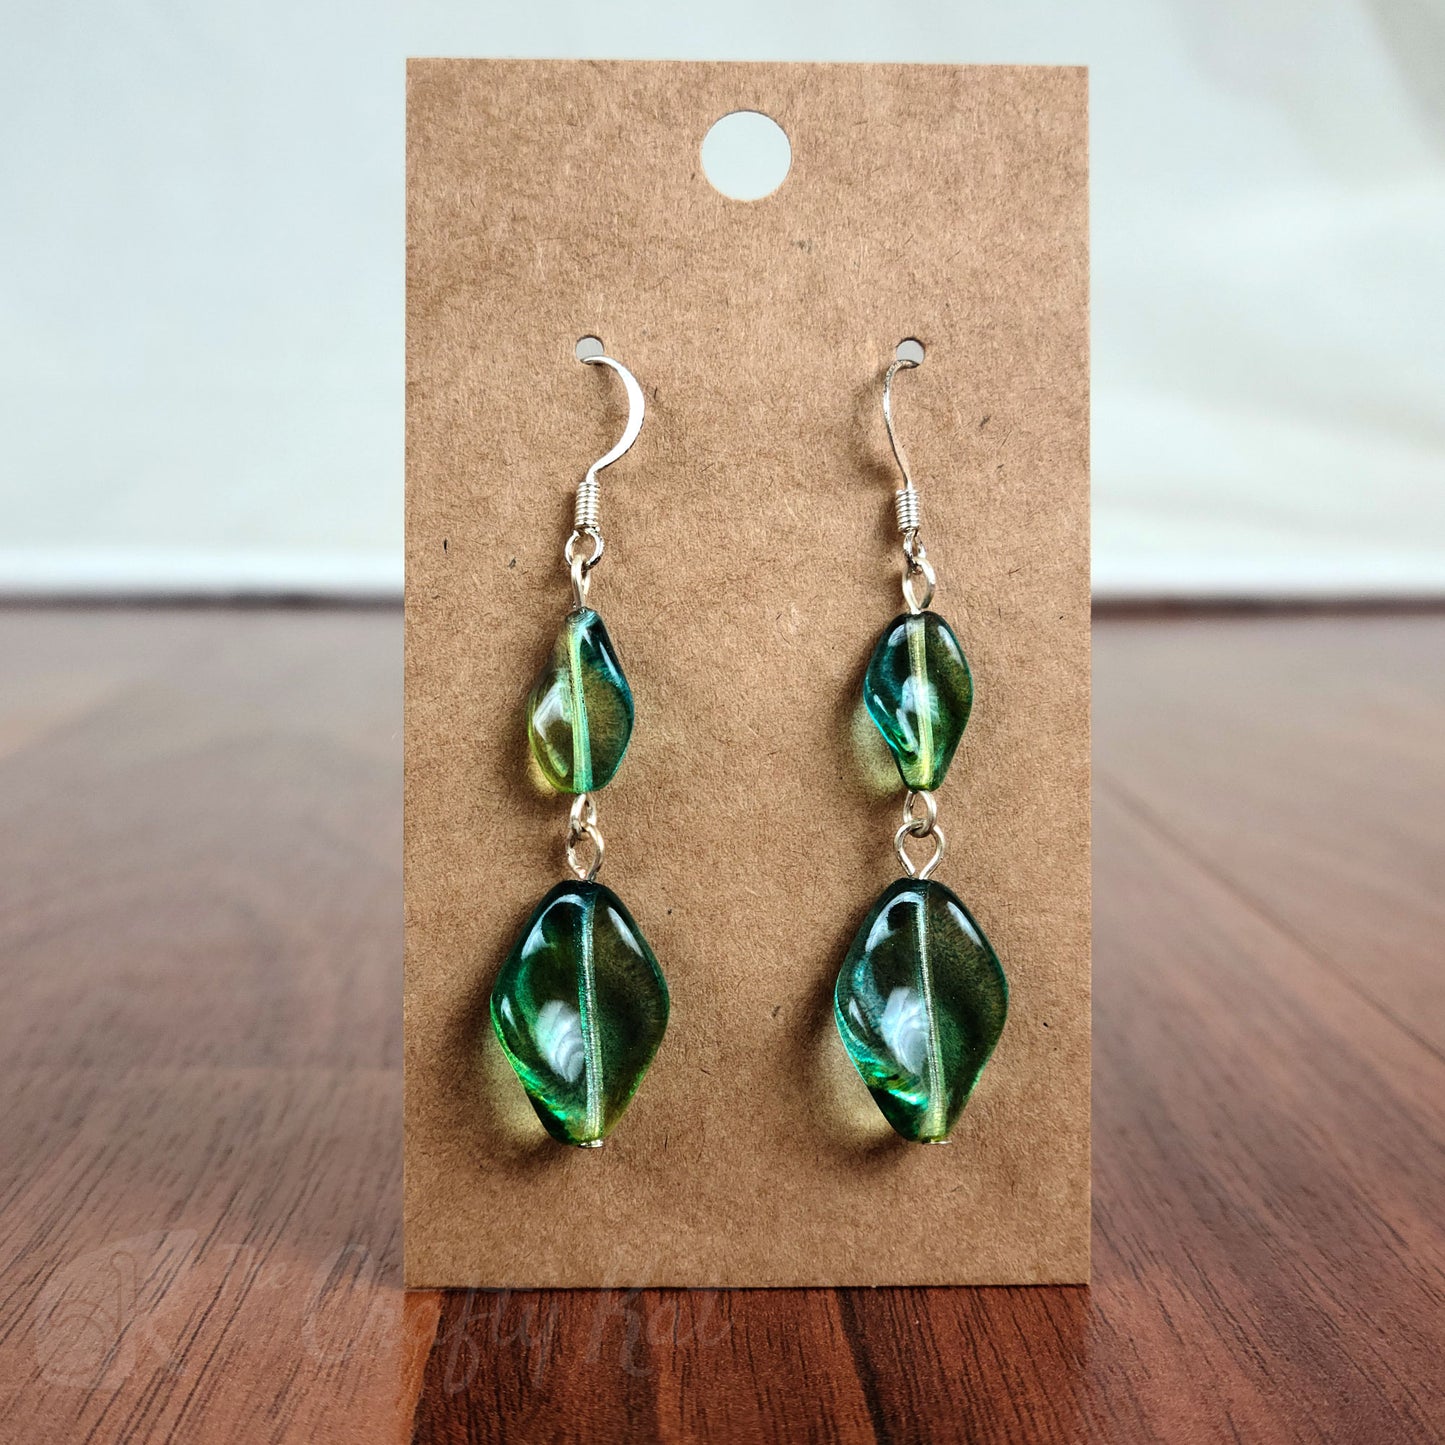 Tiered earrings made with translucent green twisted glass beads on silver fittings.